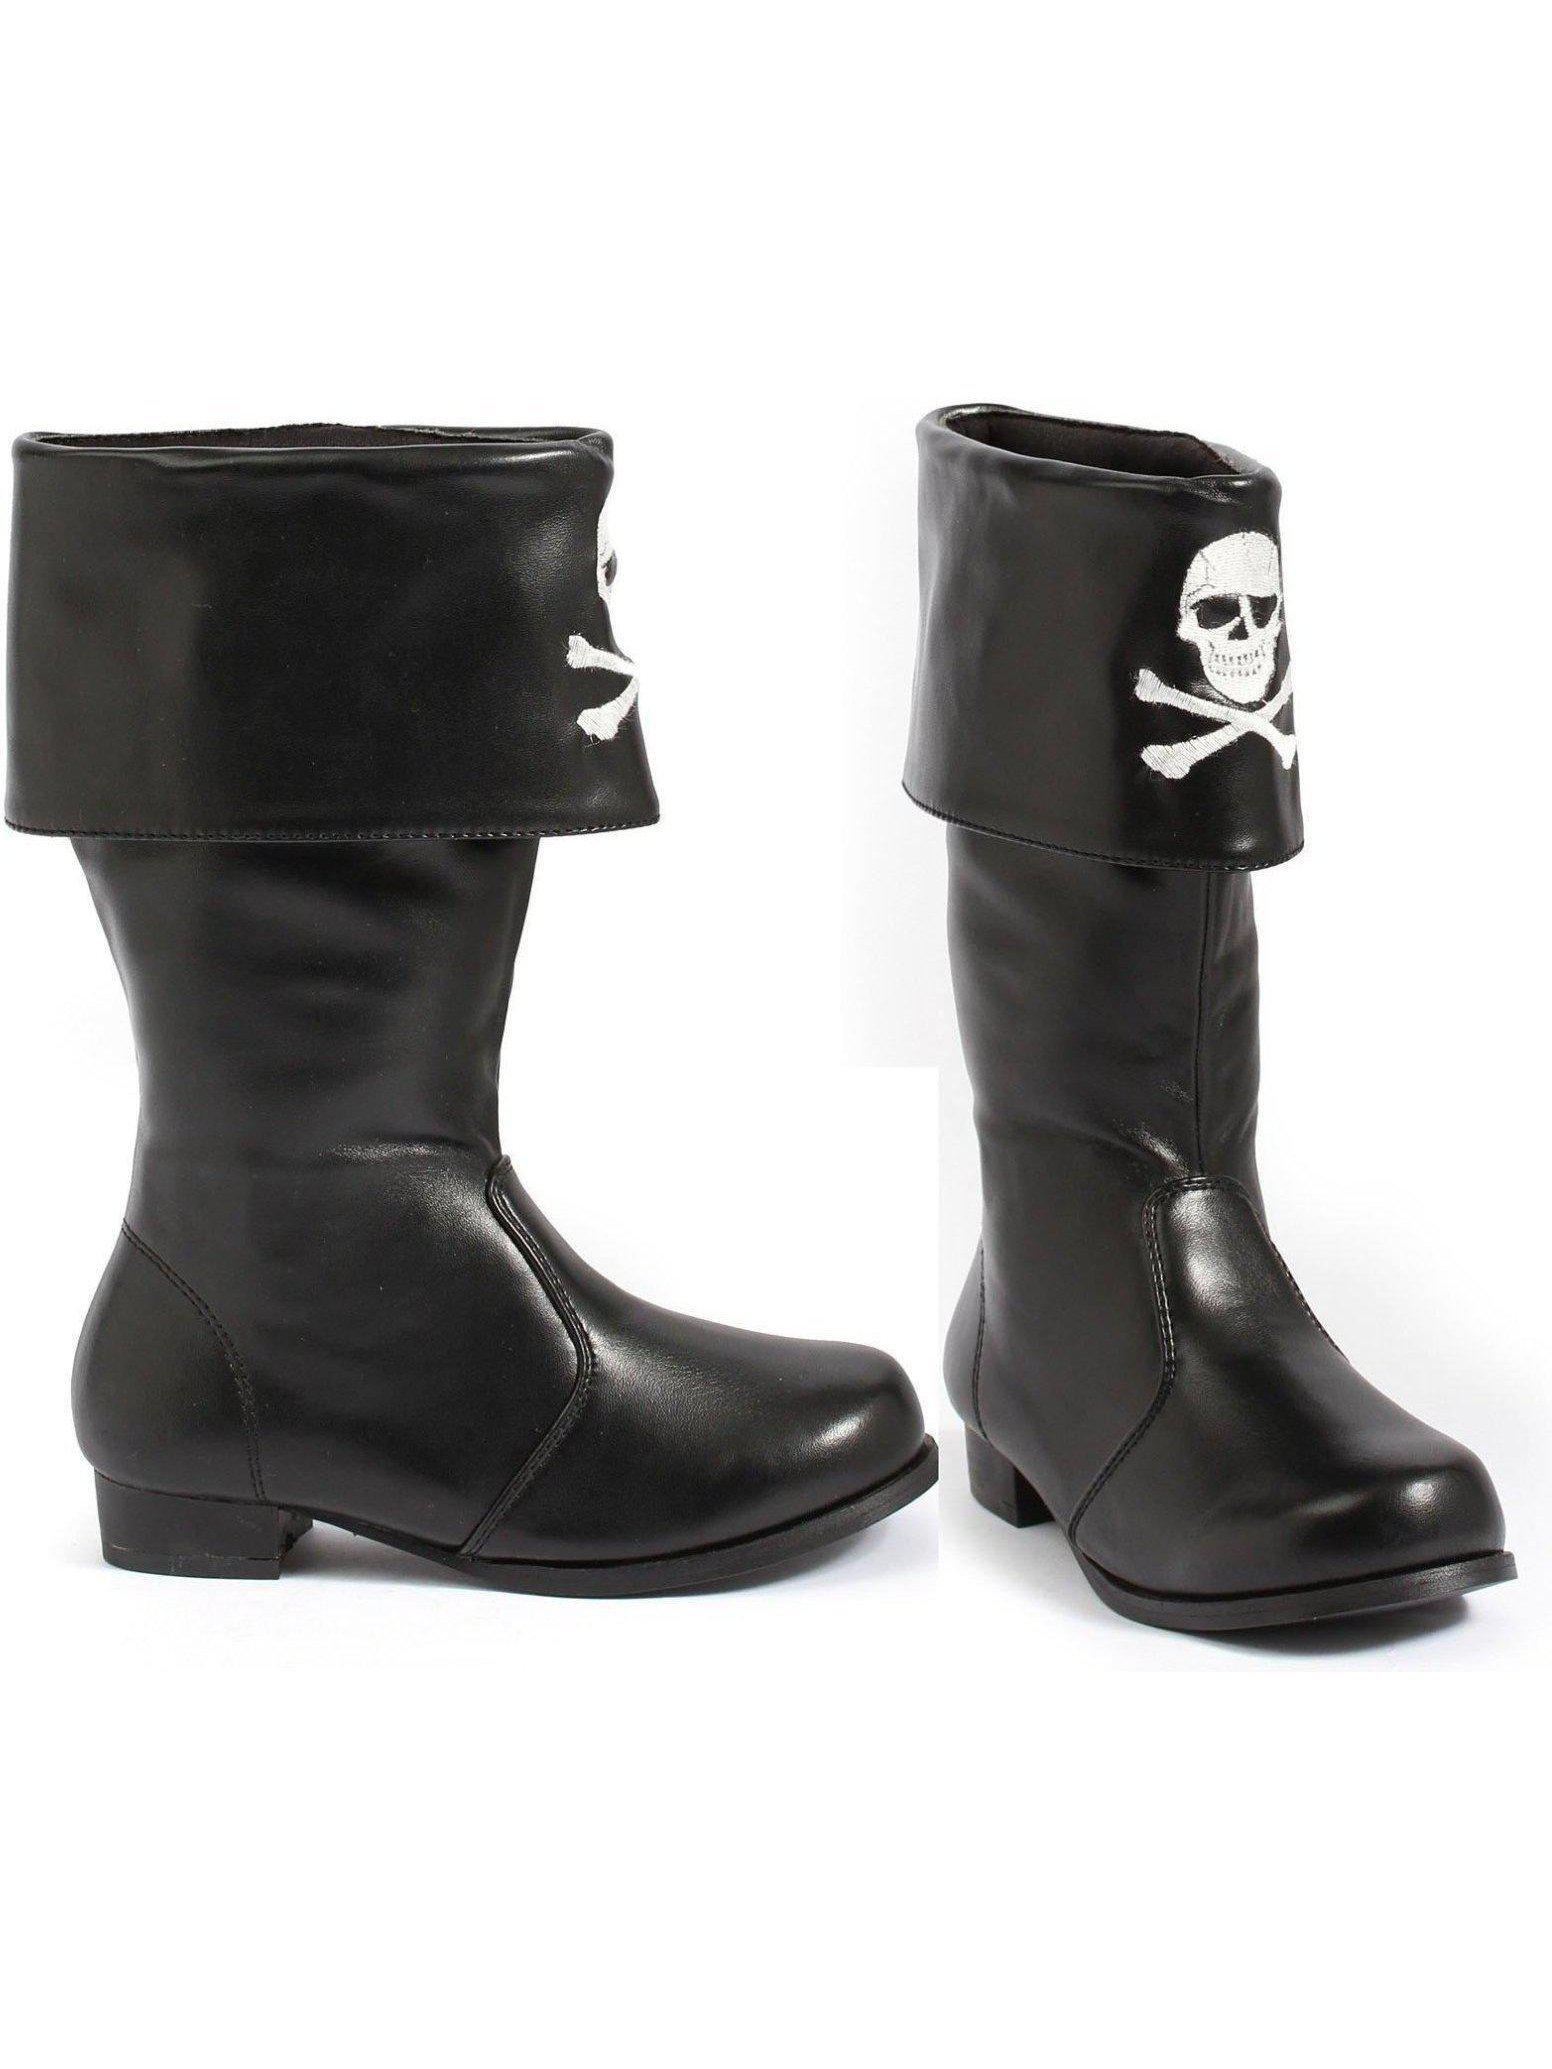 Ellie Shoes E-101-Patches 1 Heel Children Pirate Boot with Embroidered Skull Black / XS - image 1 of 2